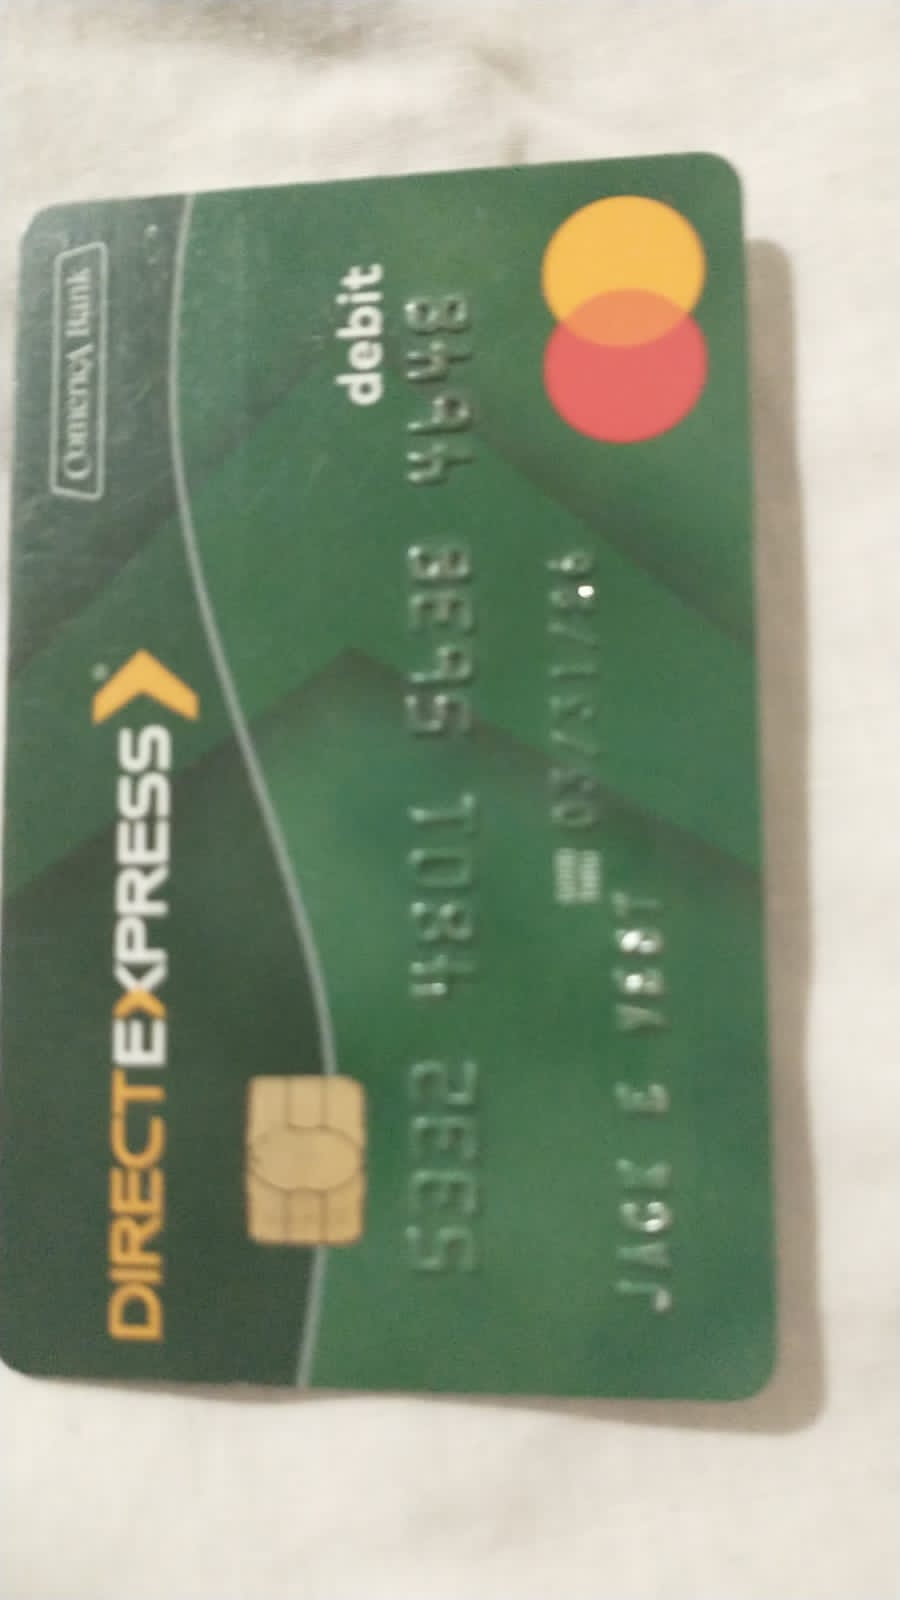 Direct Express complaint Cancel  frauds on my card for over 3months